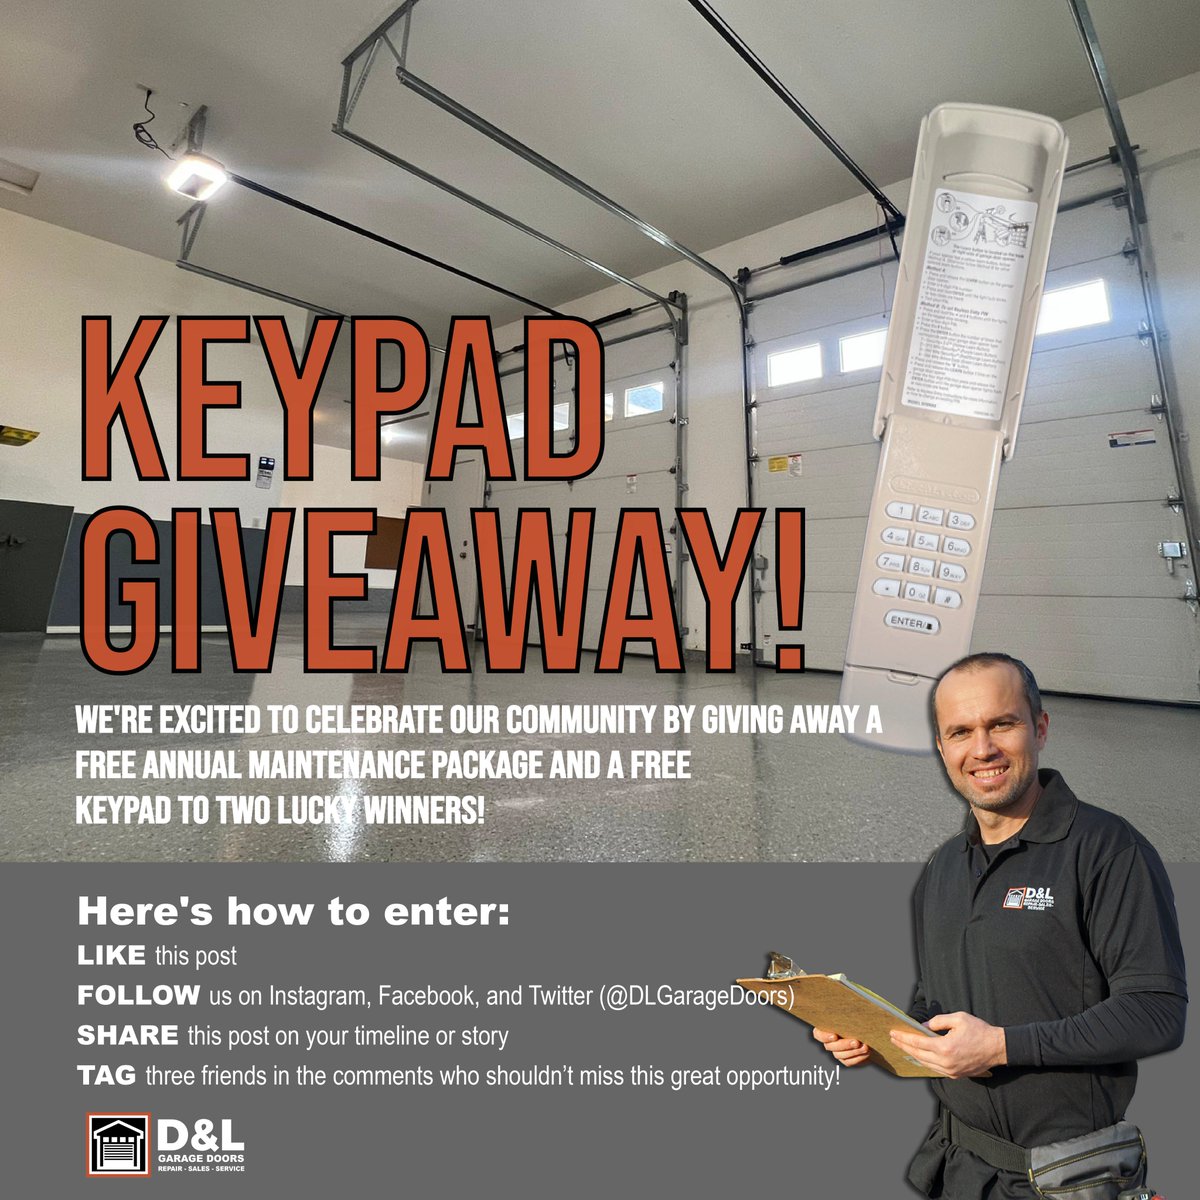 🎉 We're giving away a Free Annual Maintenance Package ($199 value) & a Keypad ($169 value)! 🚪🔑

To enter:

LIKE & RETWEET 🔄
FOLLOW us @DLGarageDoors
TAG three friends 👇
Ends 5/10! Don't miss out! #DLGarageDoorsGiveaway #HomeImprovement #EnterToWin #Sweepstakes #BoiseBusiness